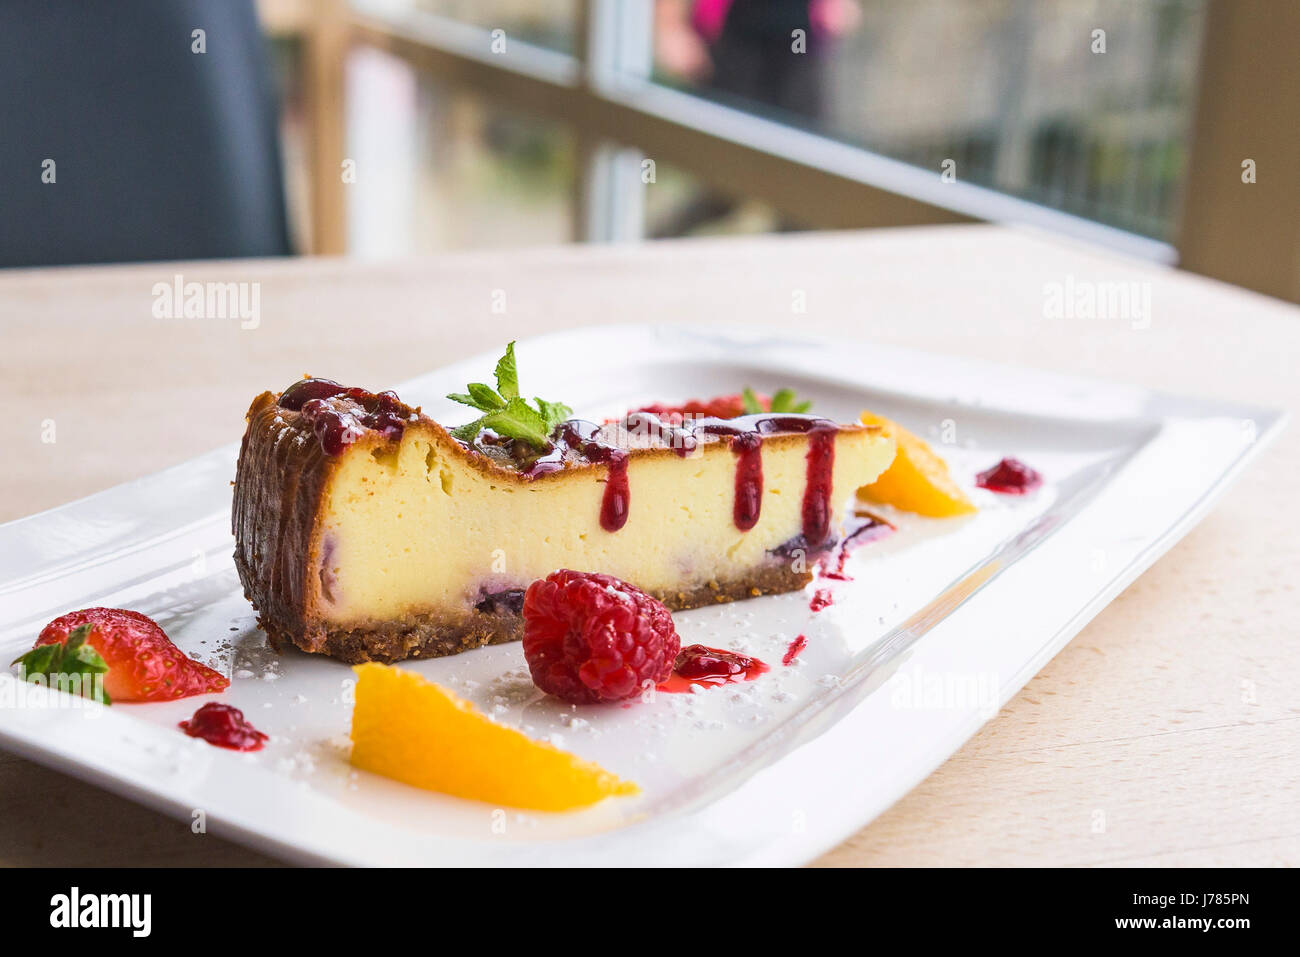 A closeup view of a colourful dessert served in a restaurant; Food; Sweet; Pudding; Cheesecake; Fruit; Tasty; Attractive presentation; Treat; Stock Photo